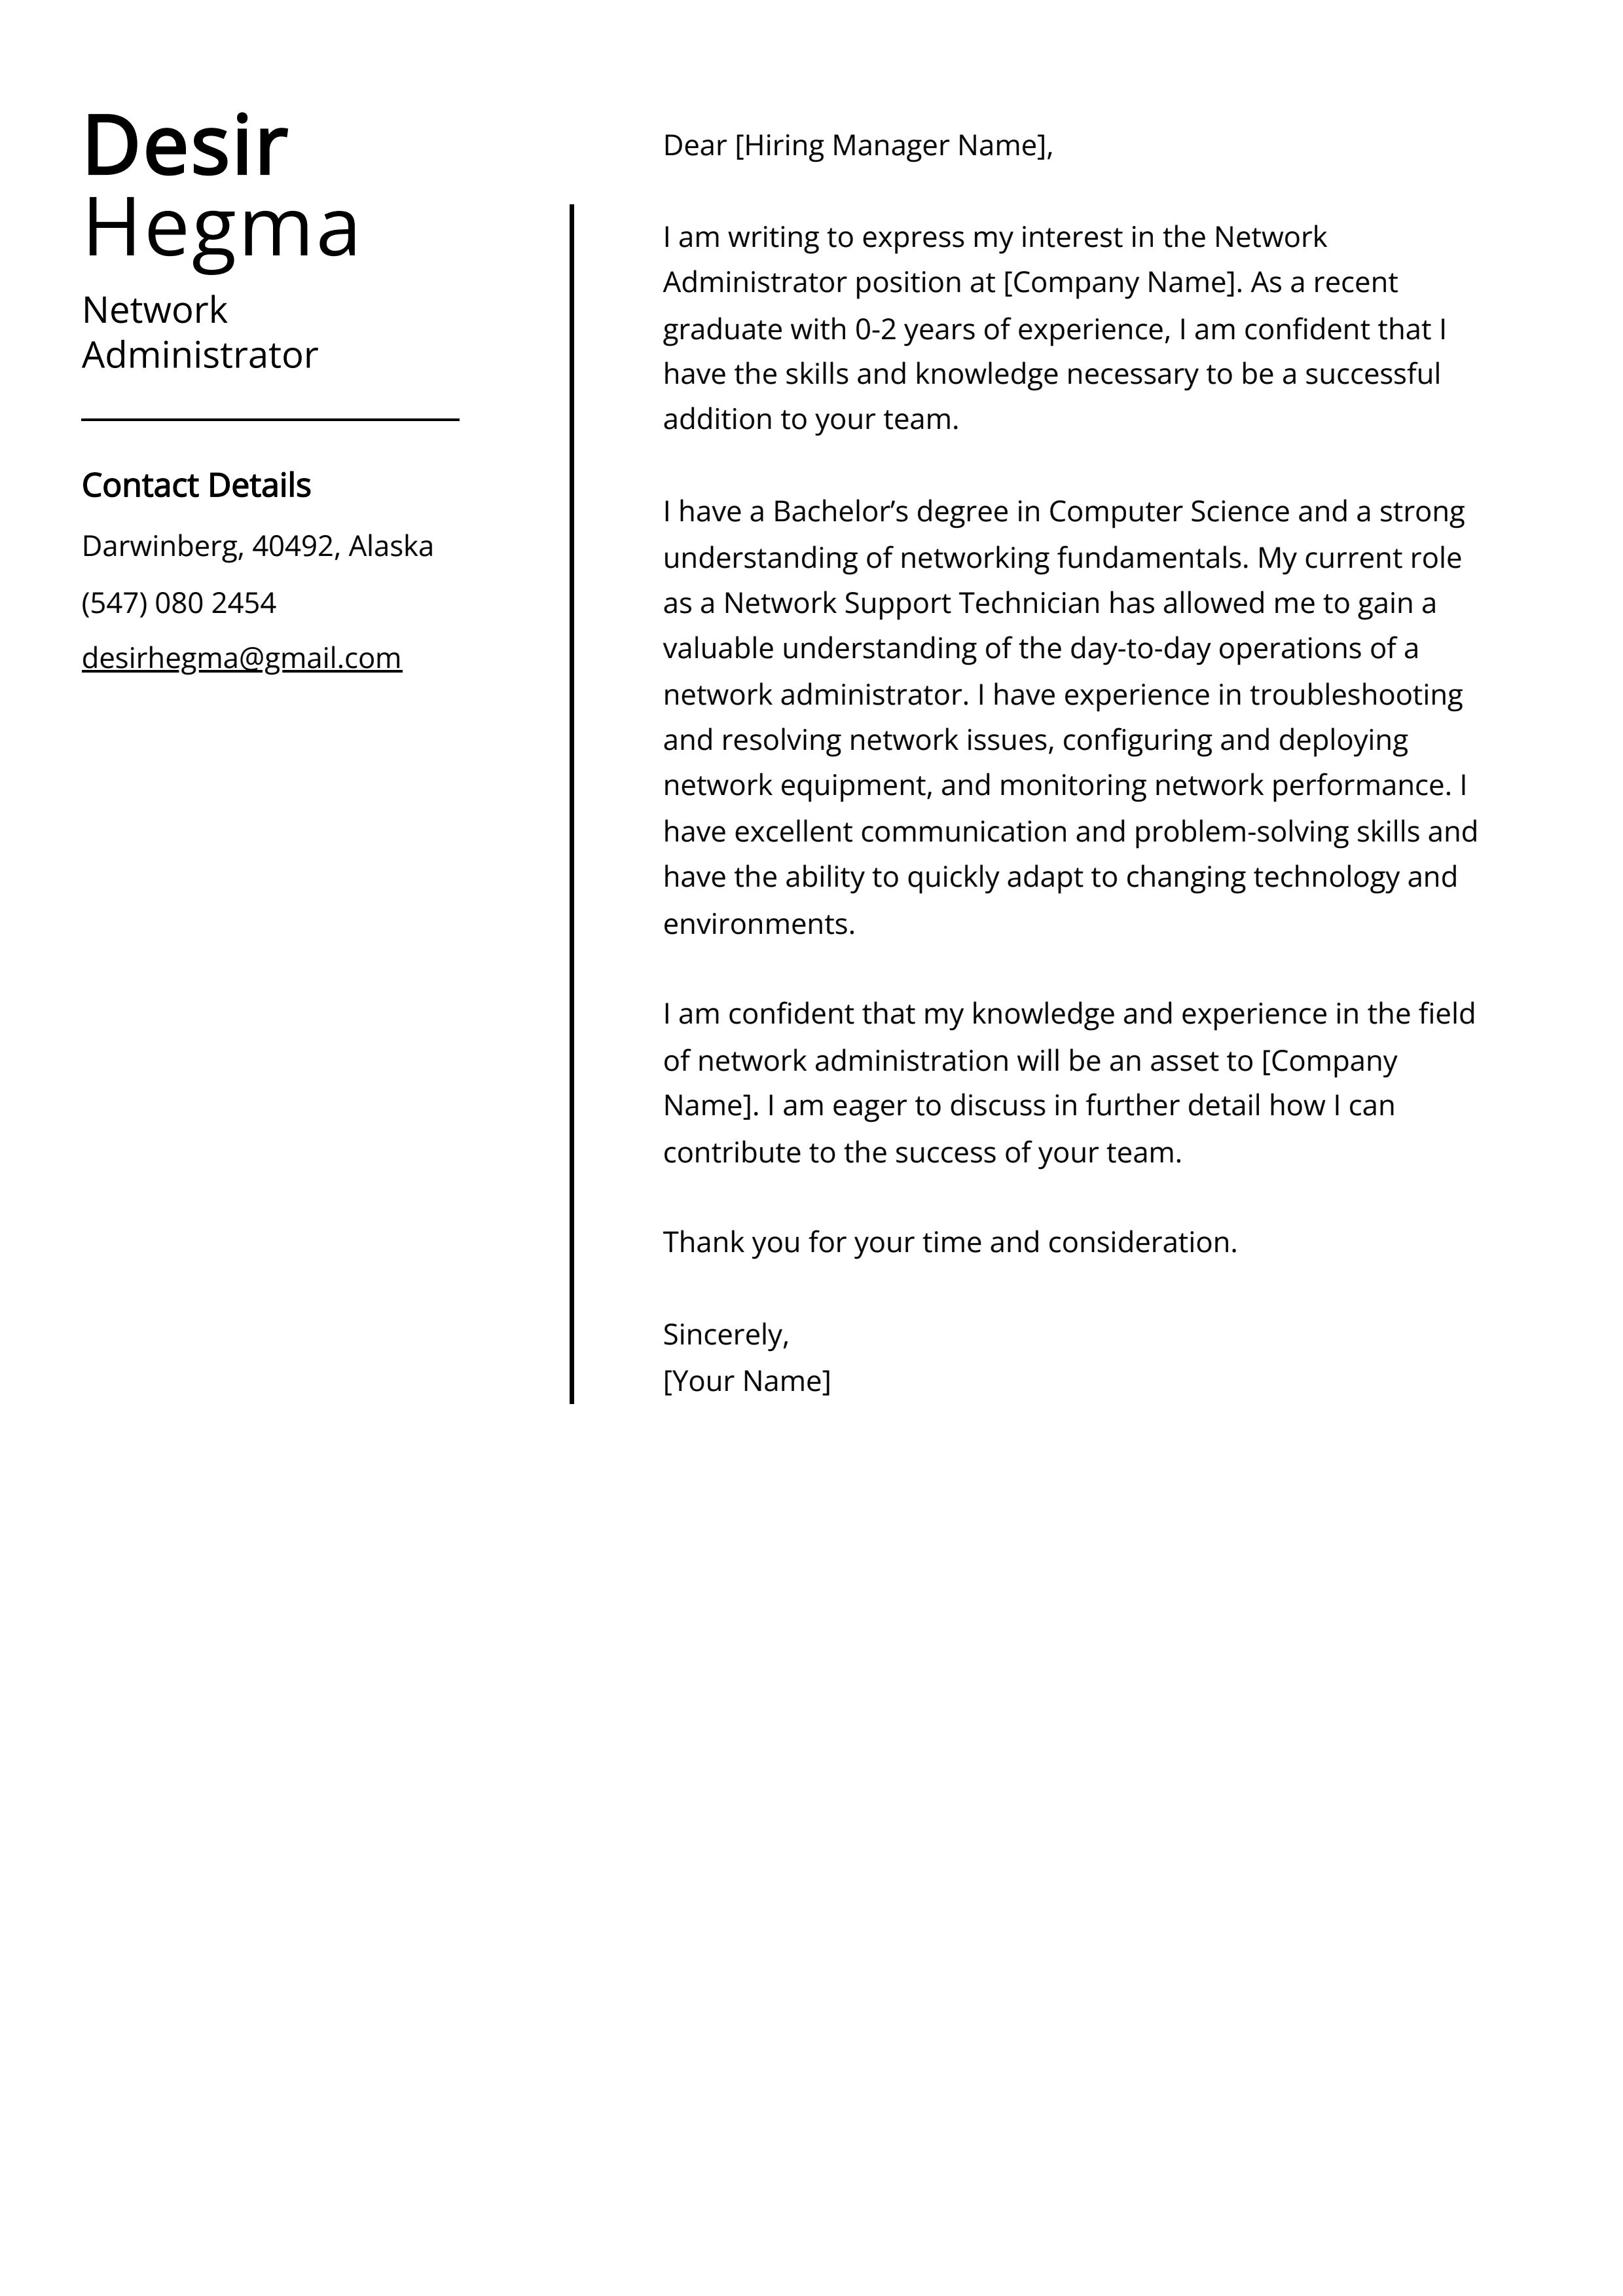 Network Administrator Cover Letter Example